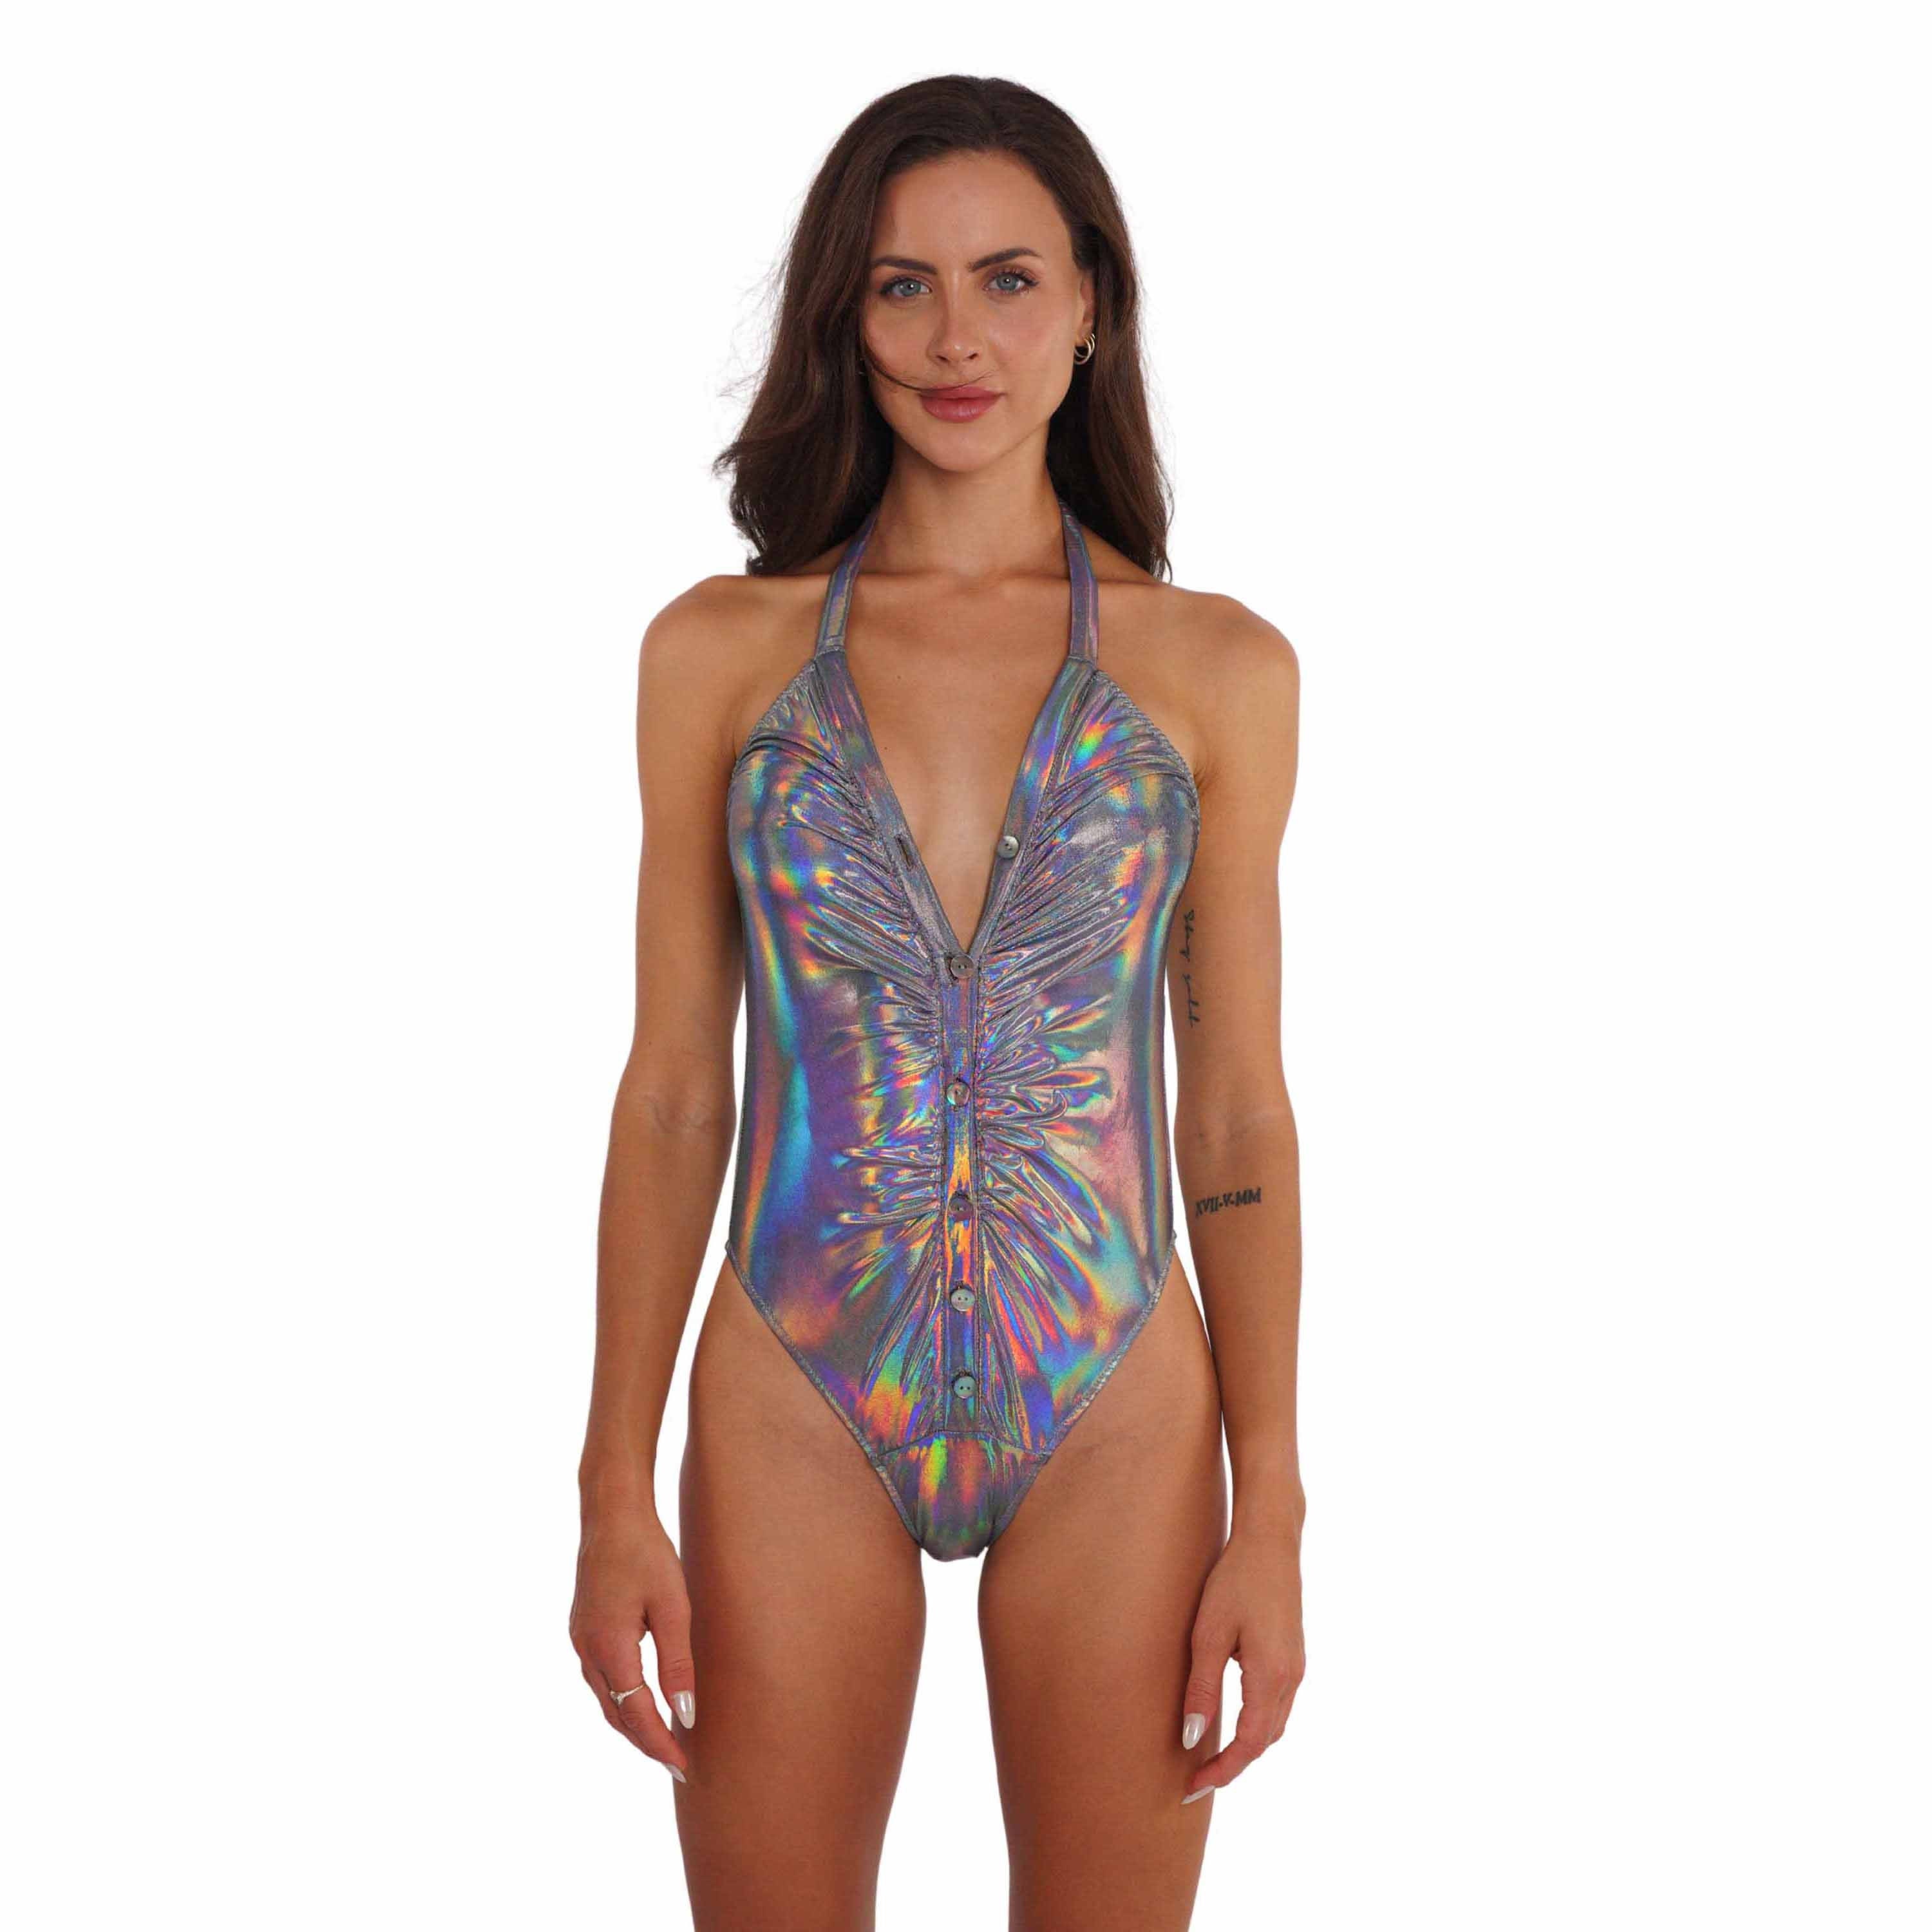 Silver Holographic Metallic One Piece Swimsuit, Plus Size